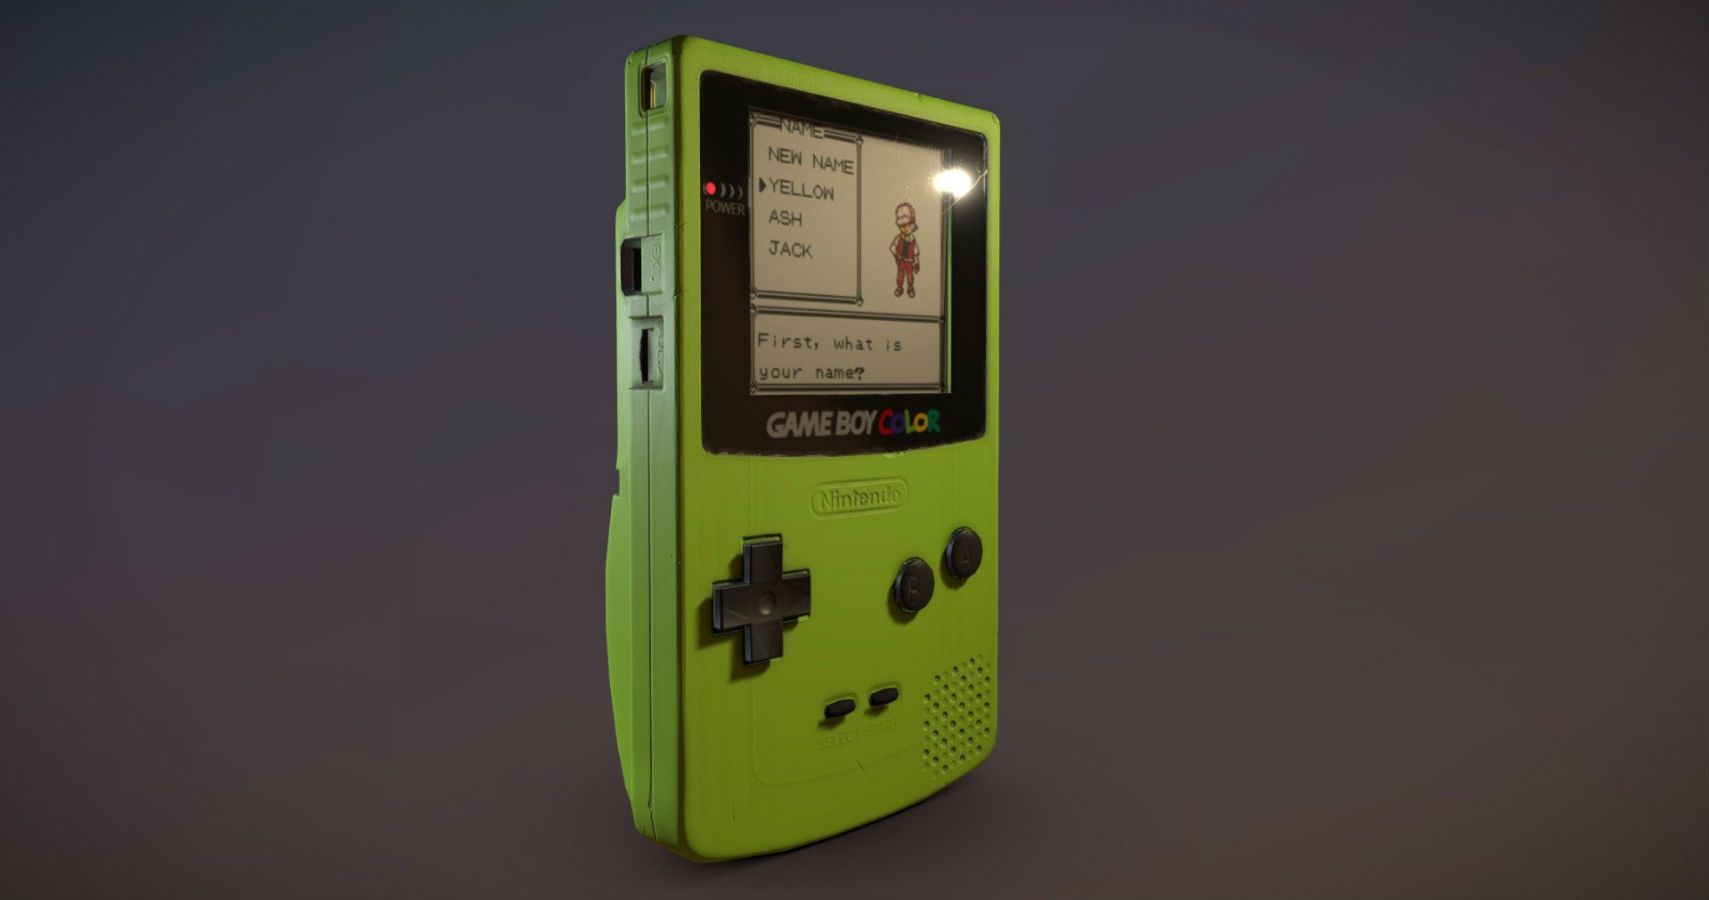 the new gameboy